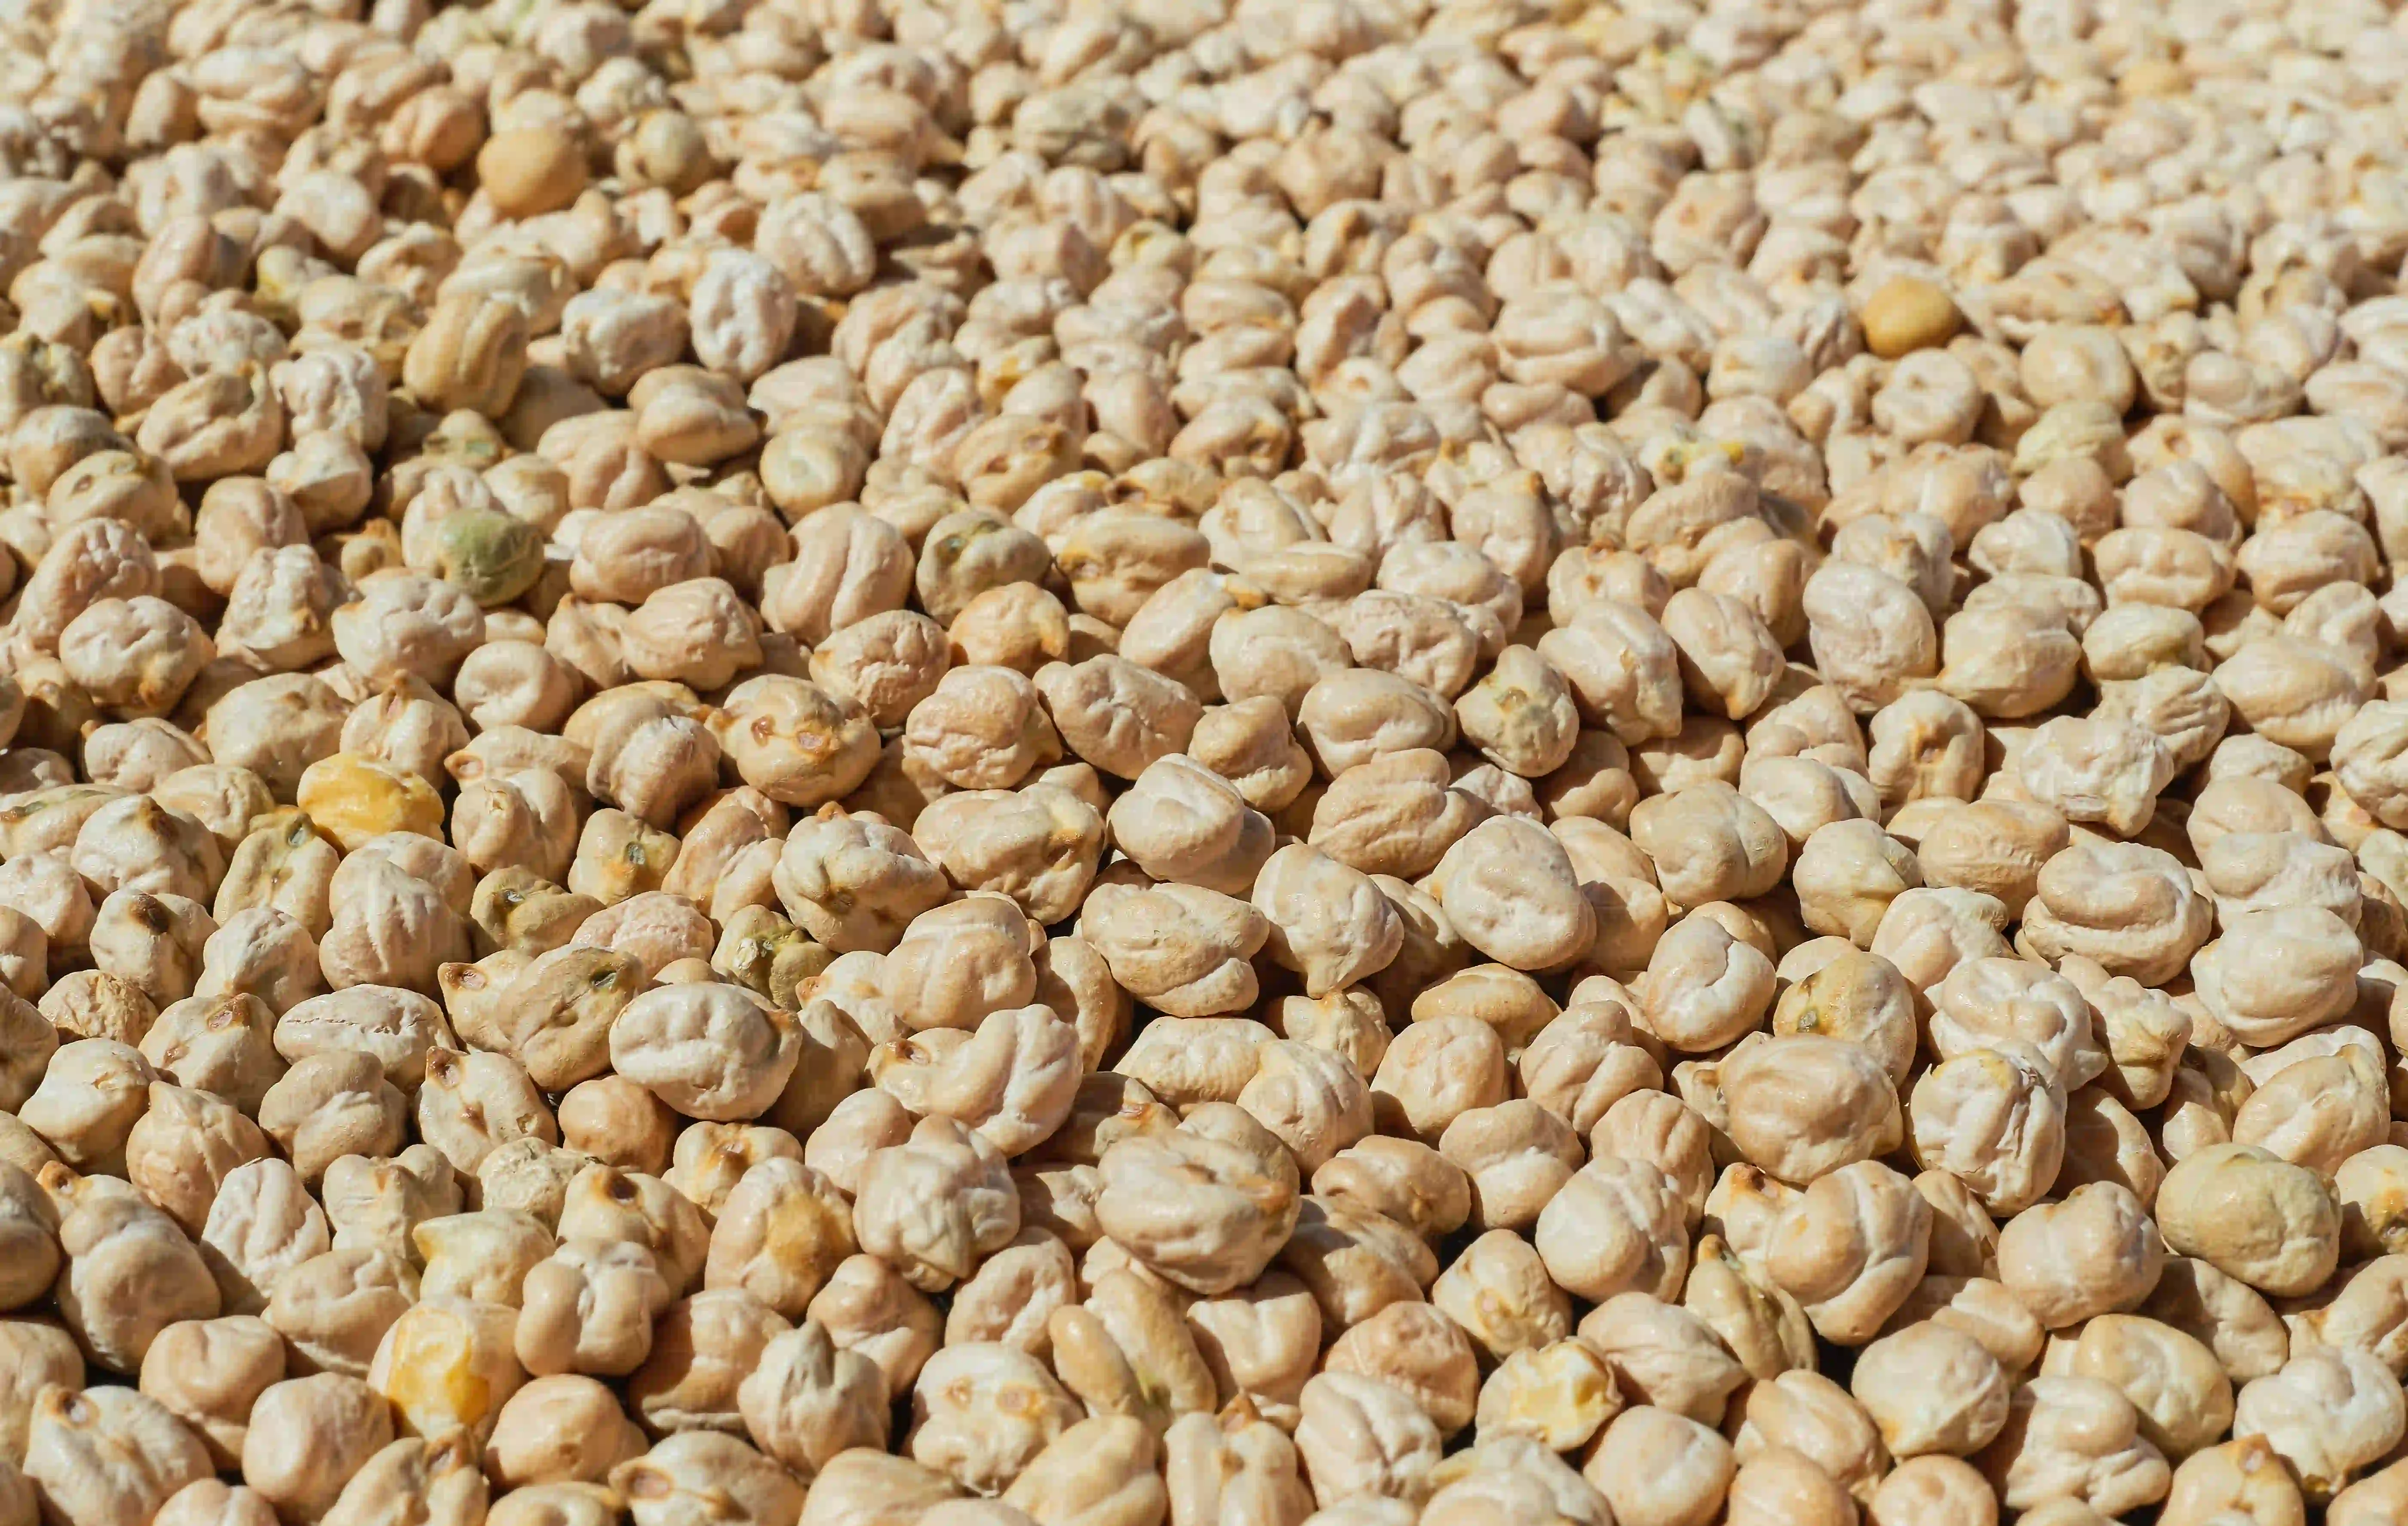 Textured Soy Protein in Chemtradeasia